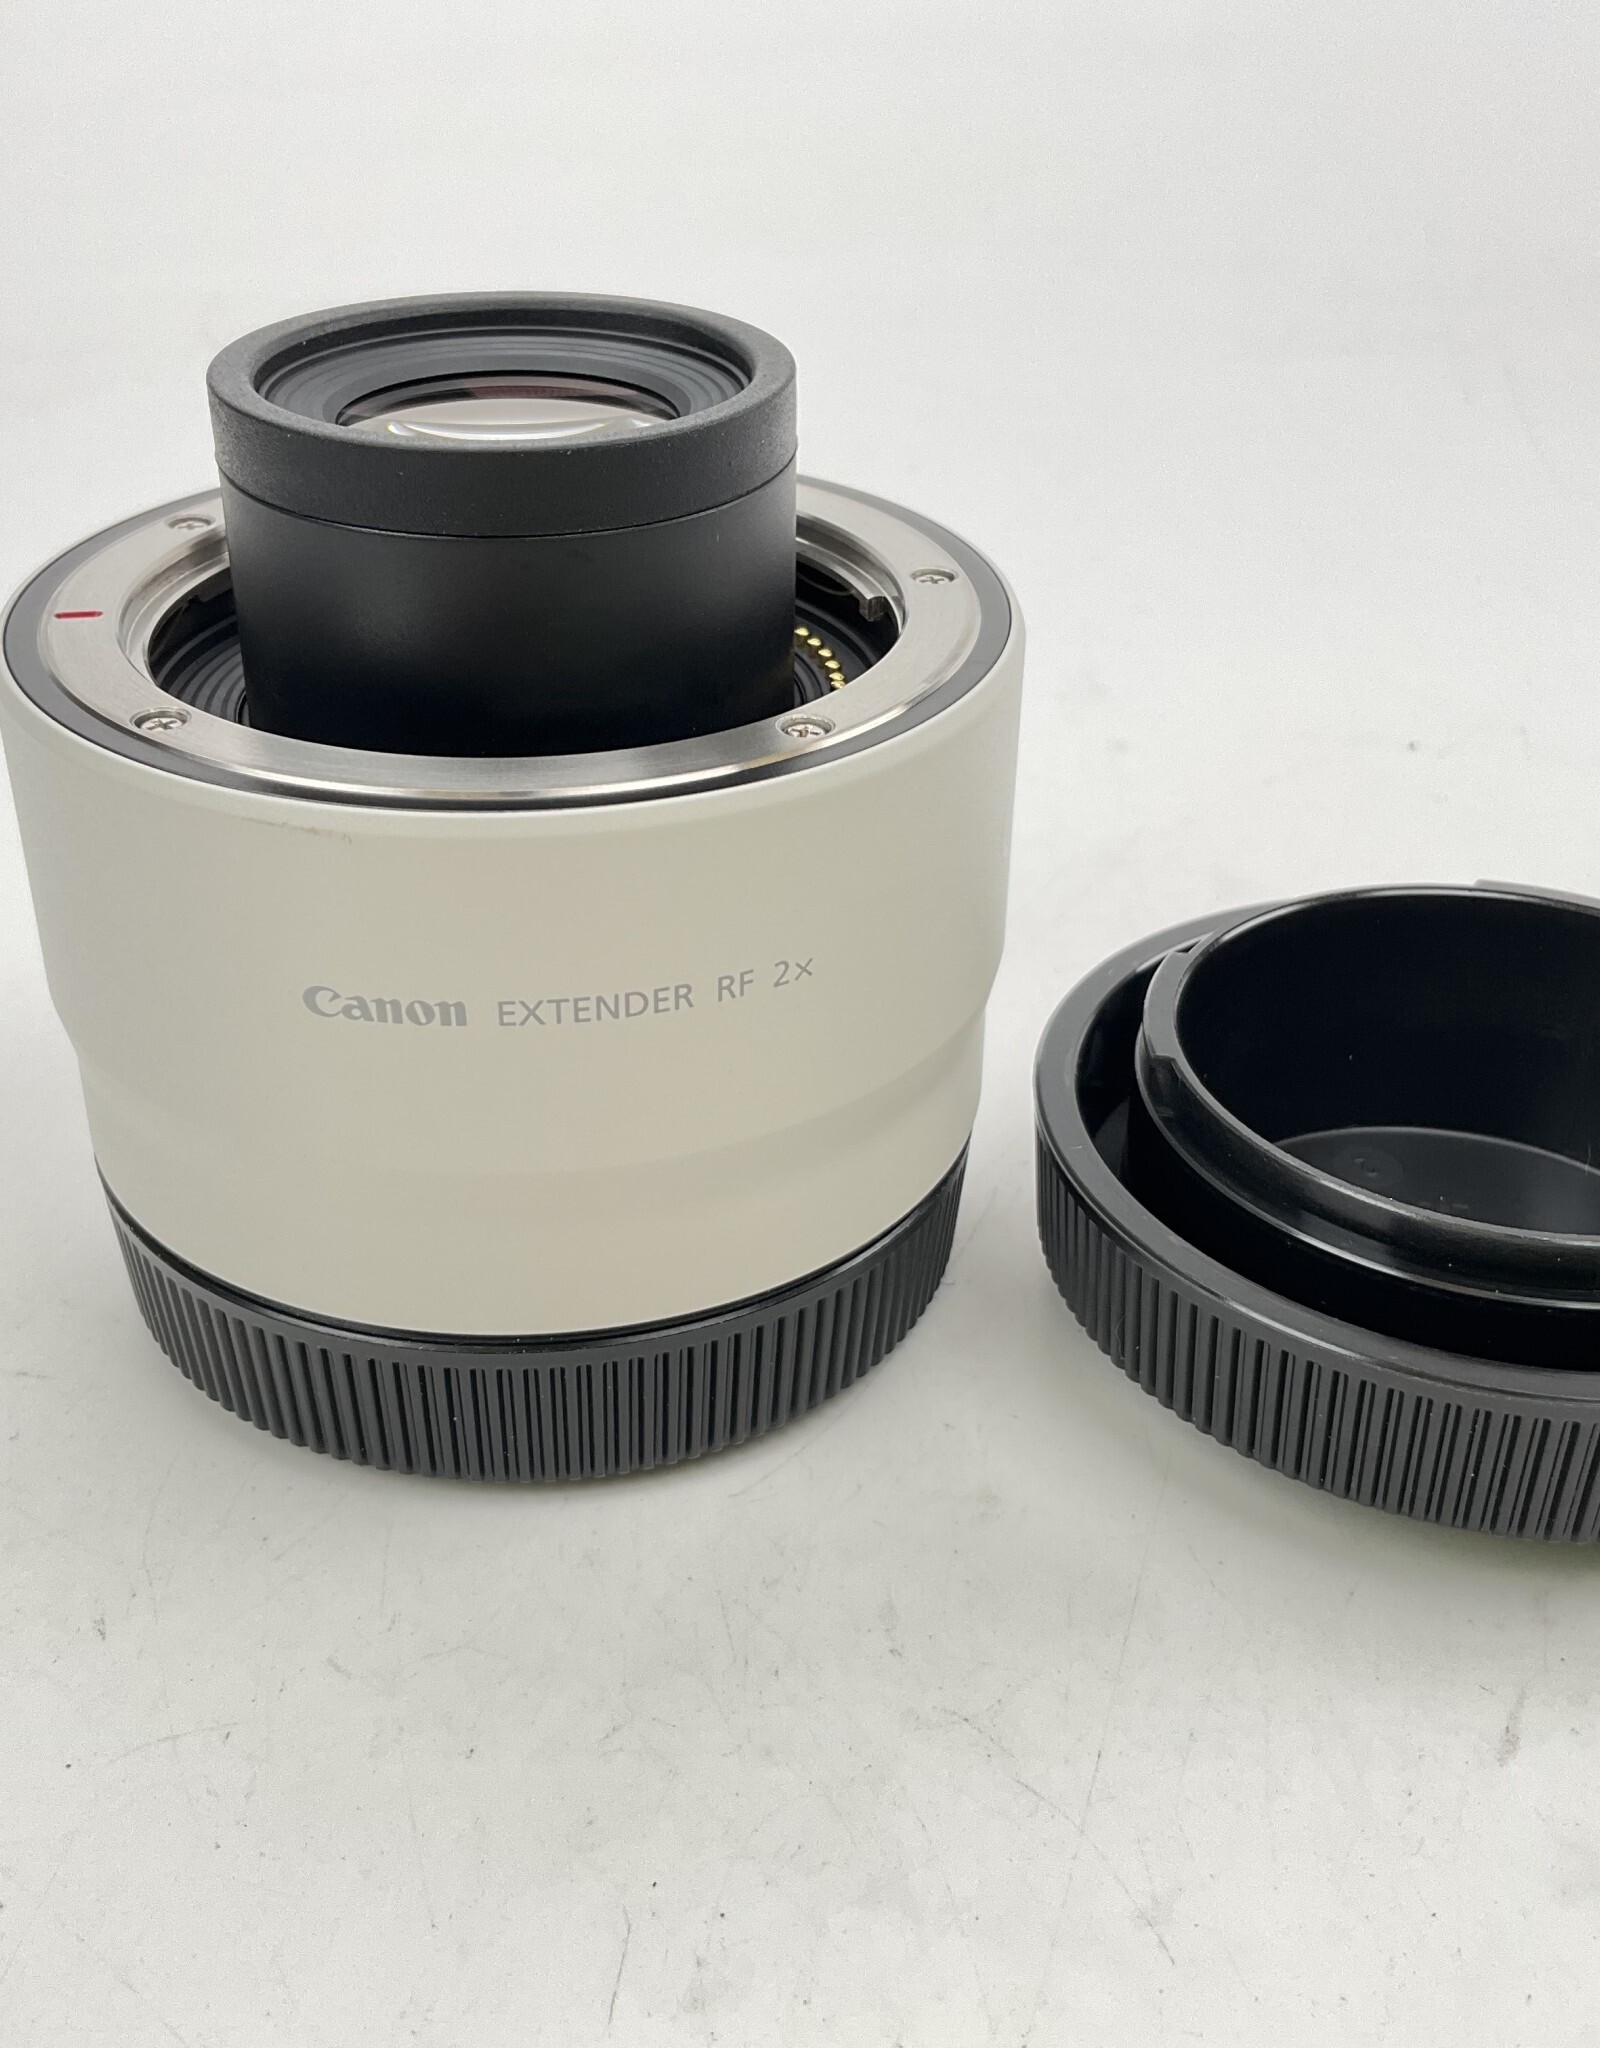 CANON Canon Extender RF 2x Used EX